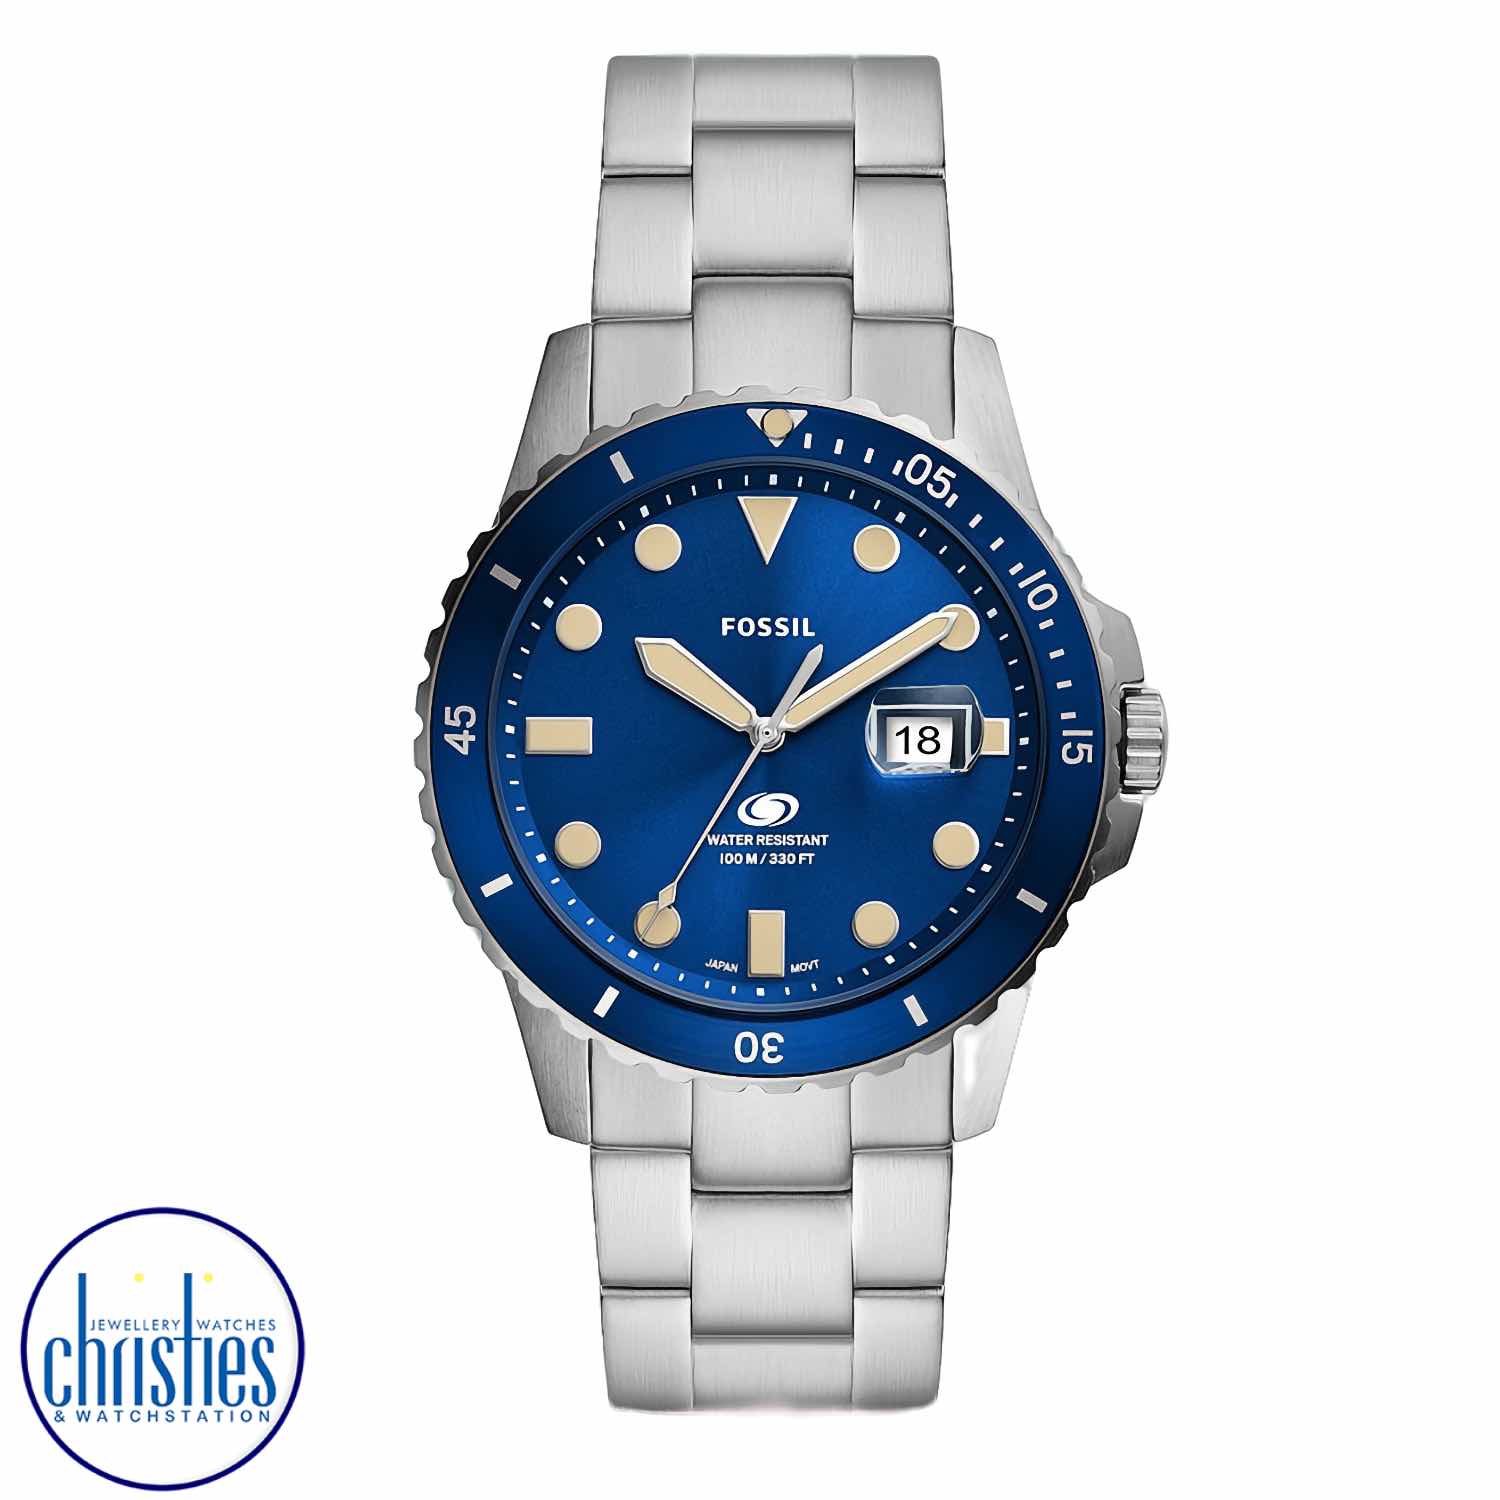 FS5949 Fossil Blue Stainless Steel Watch. FS5949 Fossil Blue Three-Hand Date Stainless Steel WatchAfterpay - Split your purchase into 4 instalments - Pay for your purchase over 4 instalments, due every two weeks.